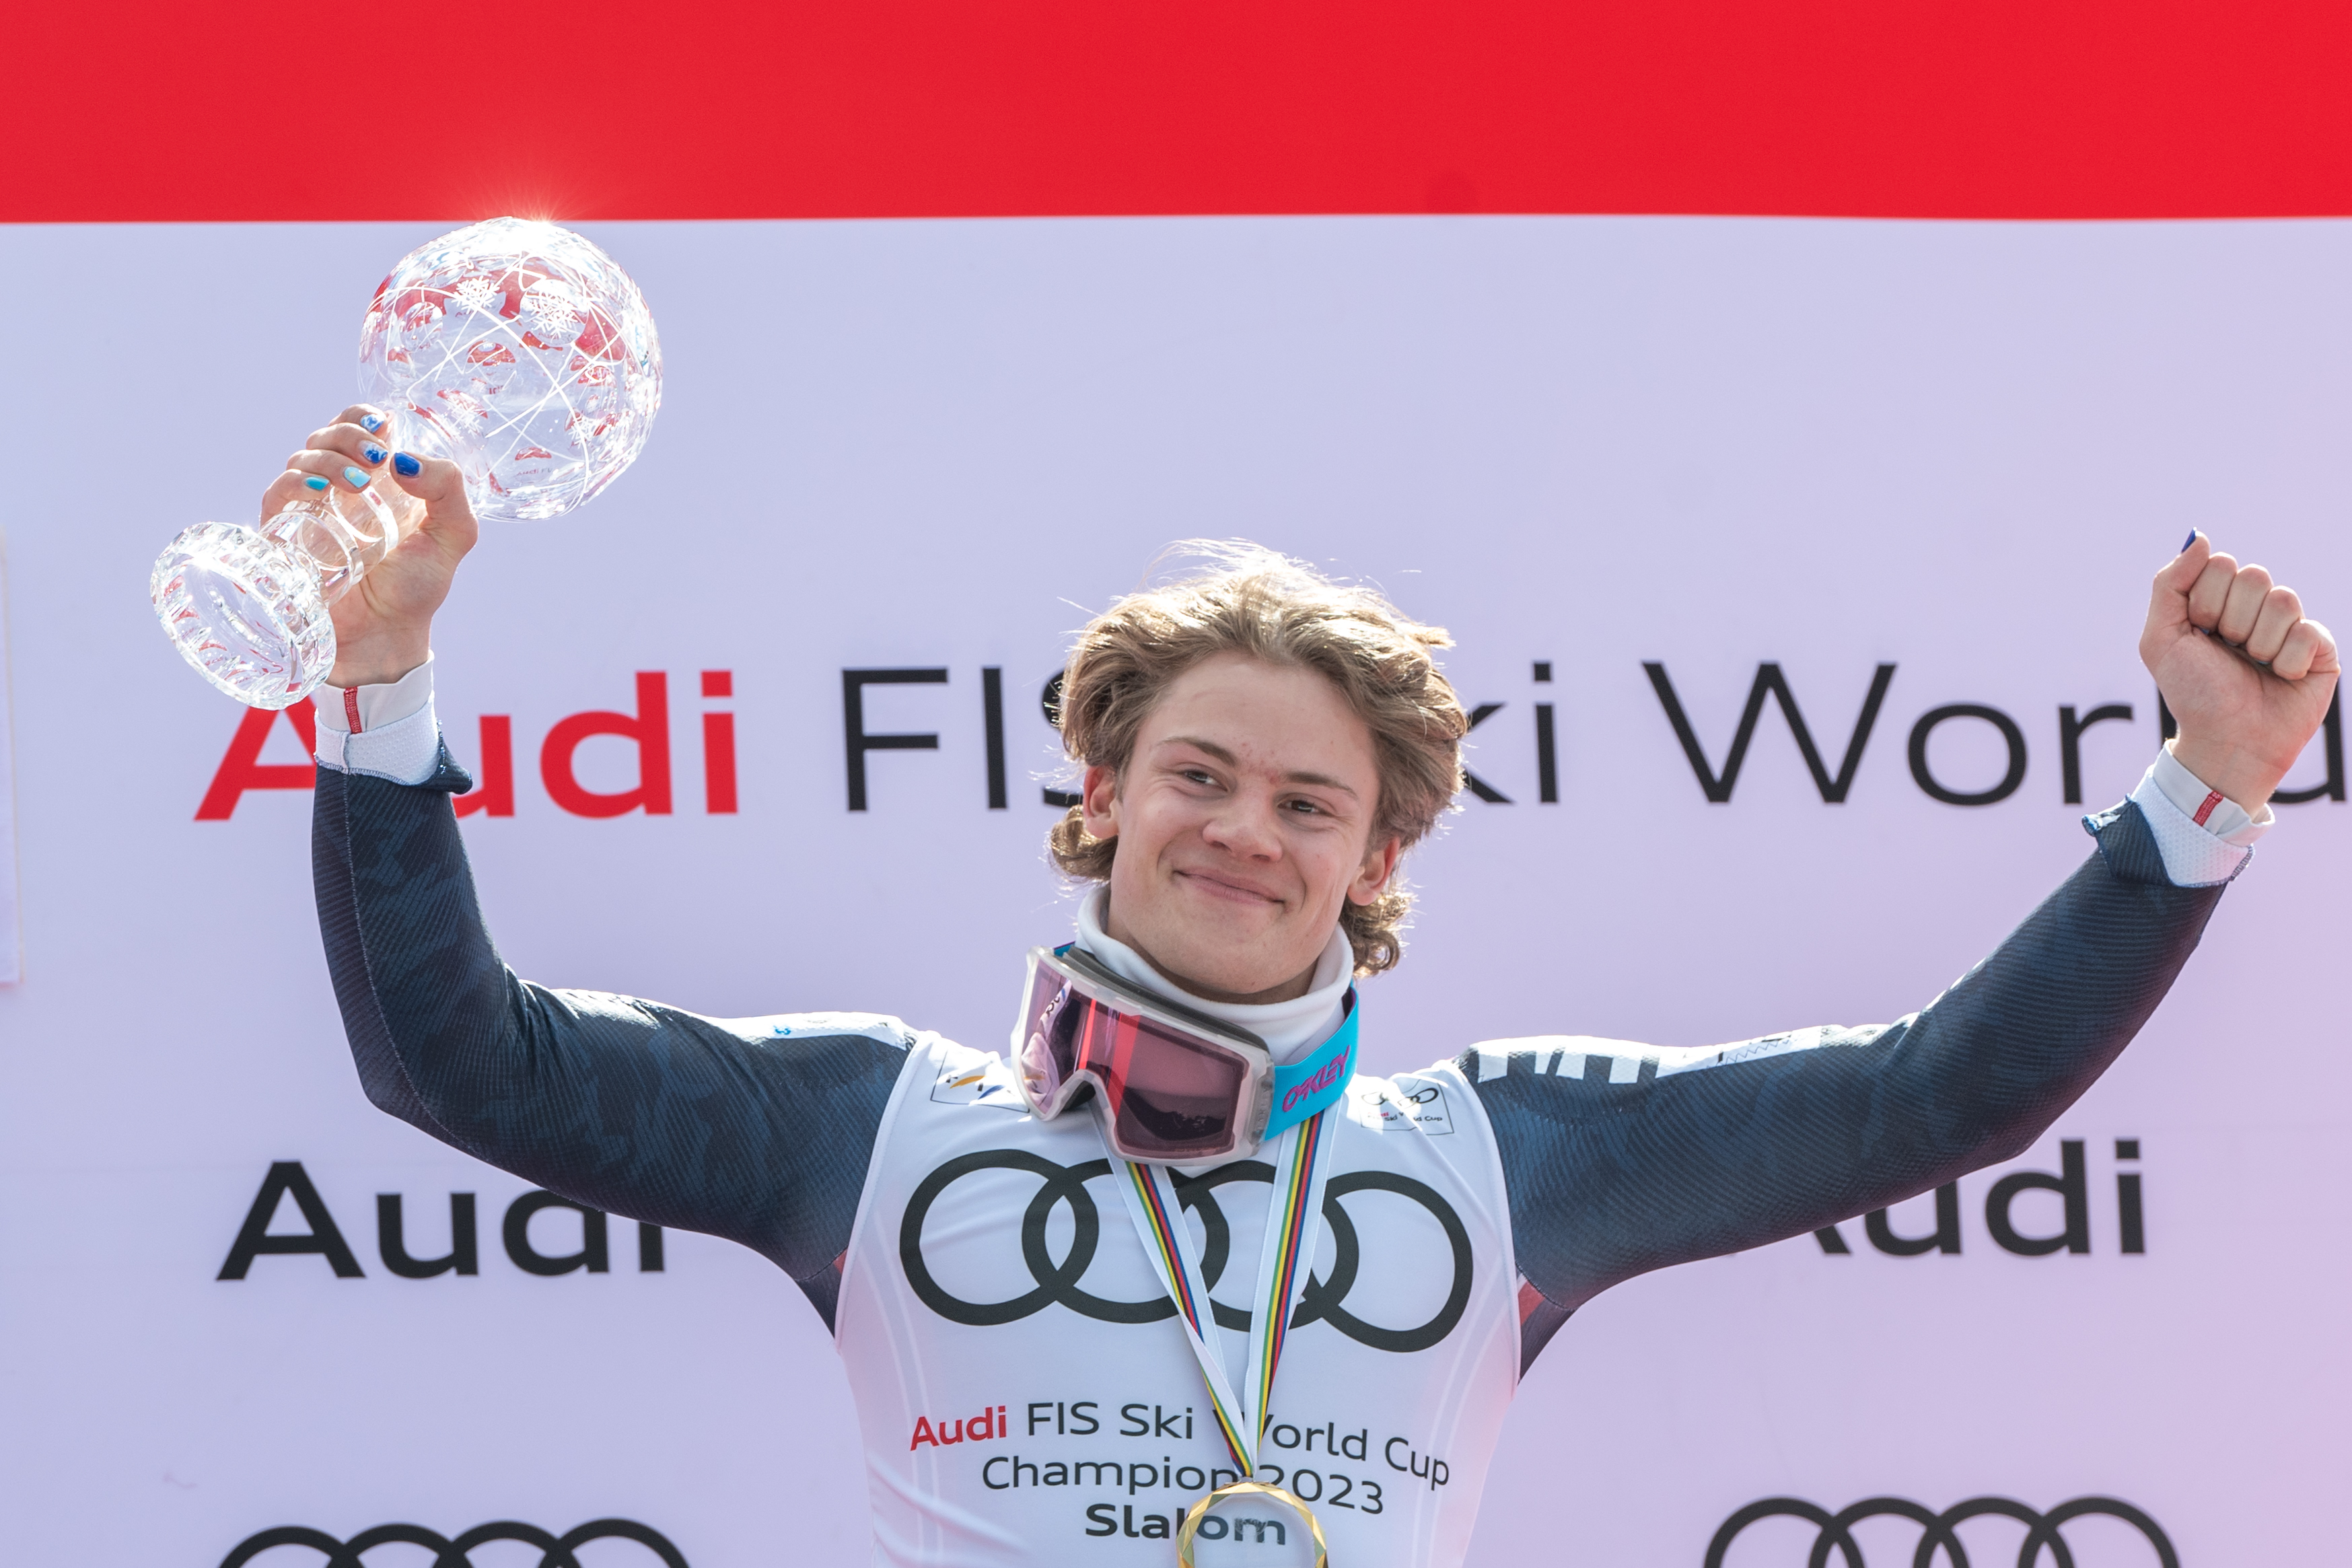 Lucas Braathen of Norway poses with the winner's trophy at the International Ski Federation Alpine Ski World Cup in Soldeu, Andorra, March 19, 2023. /CFP